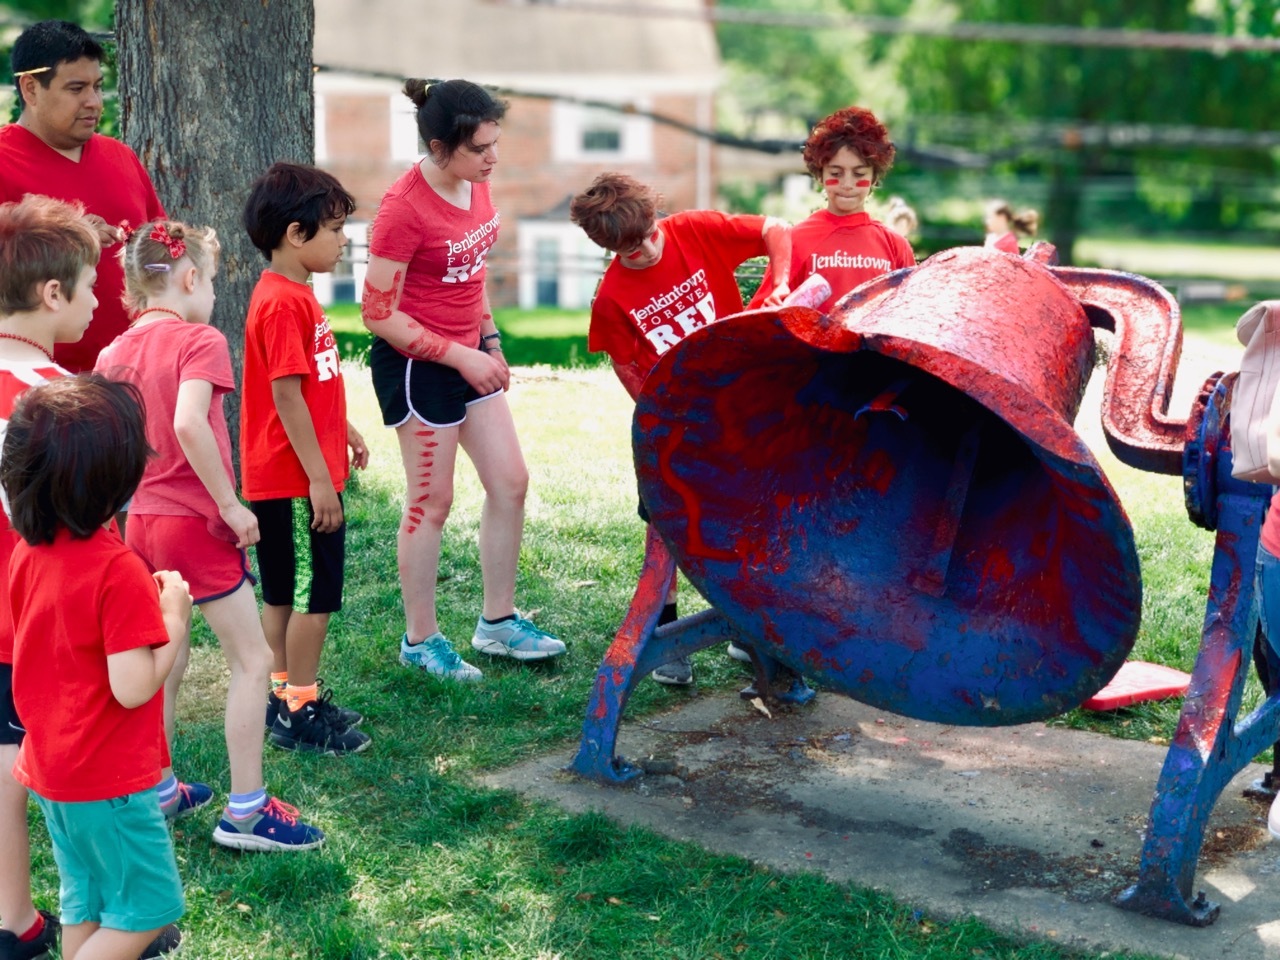 The winning Reds painting the bell at the conclusion of Jenkintown Color Day 2019